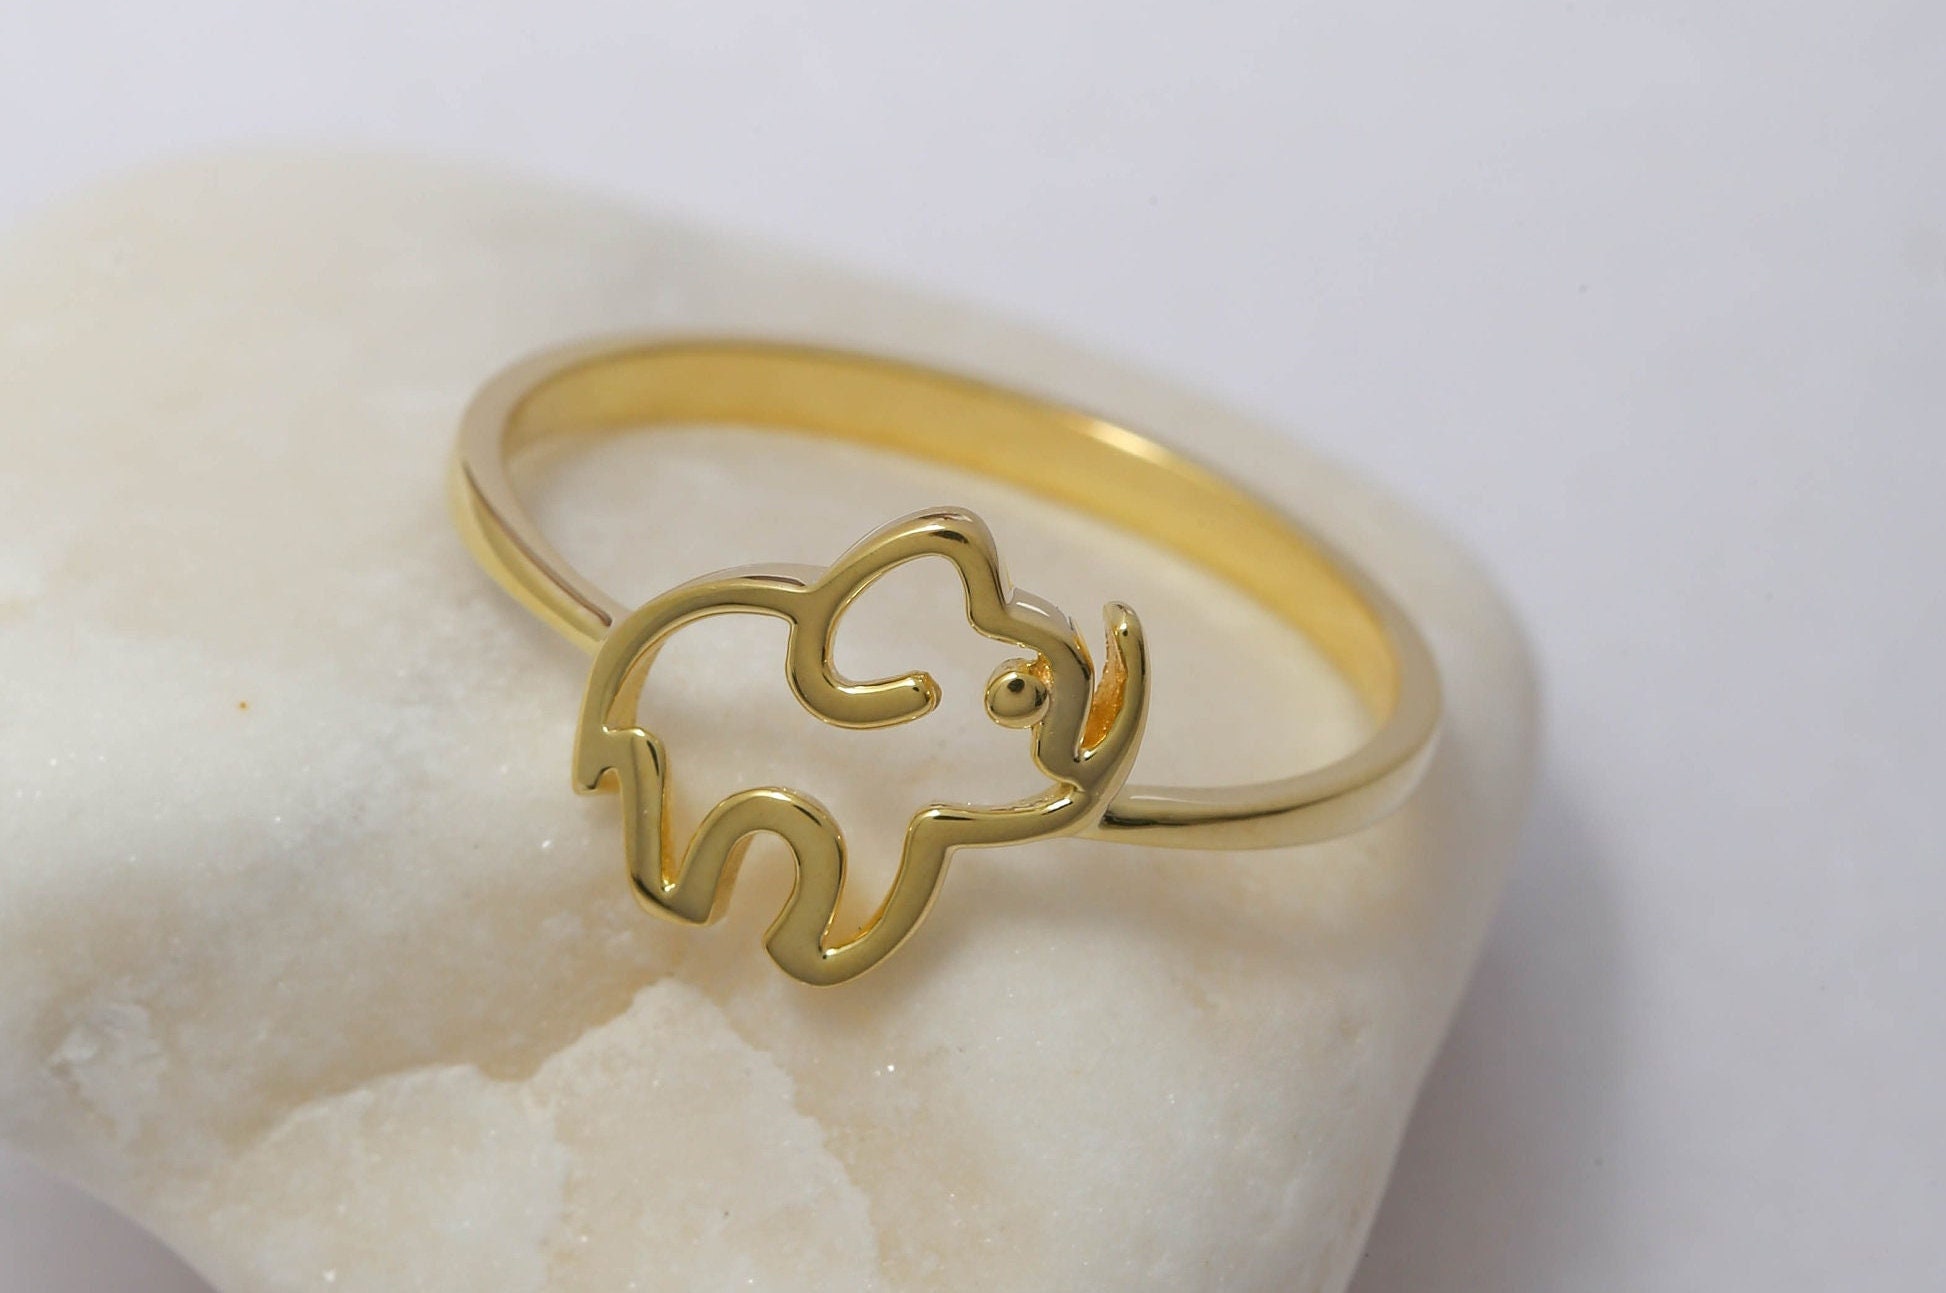 Buy 18K Gold Ganesha Baby Ring 492A751 Online from Vaibhav Jewellers